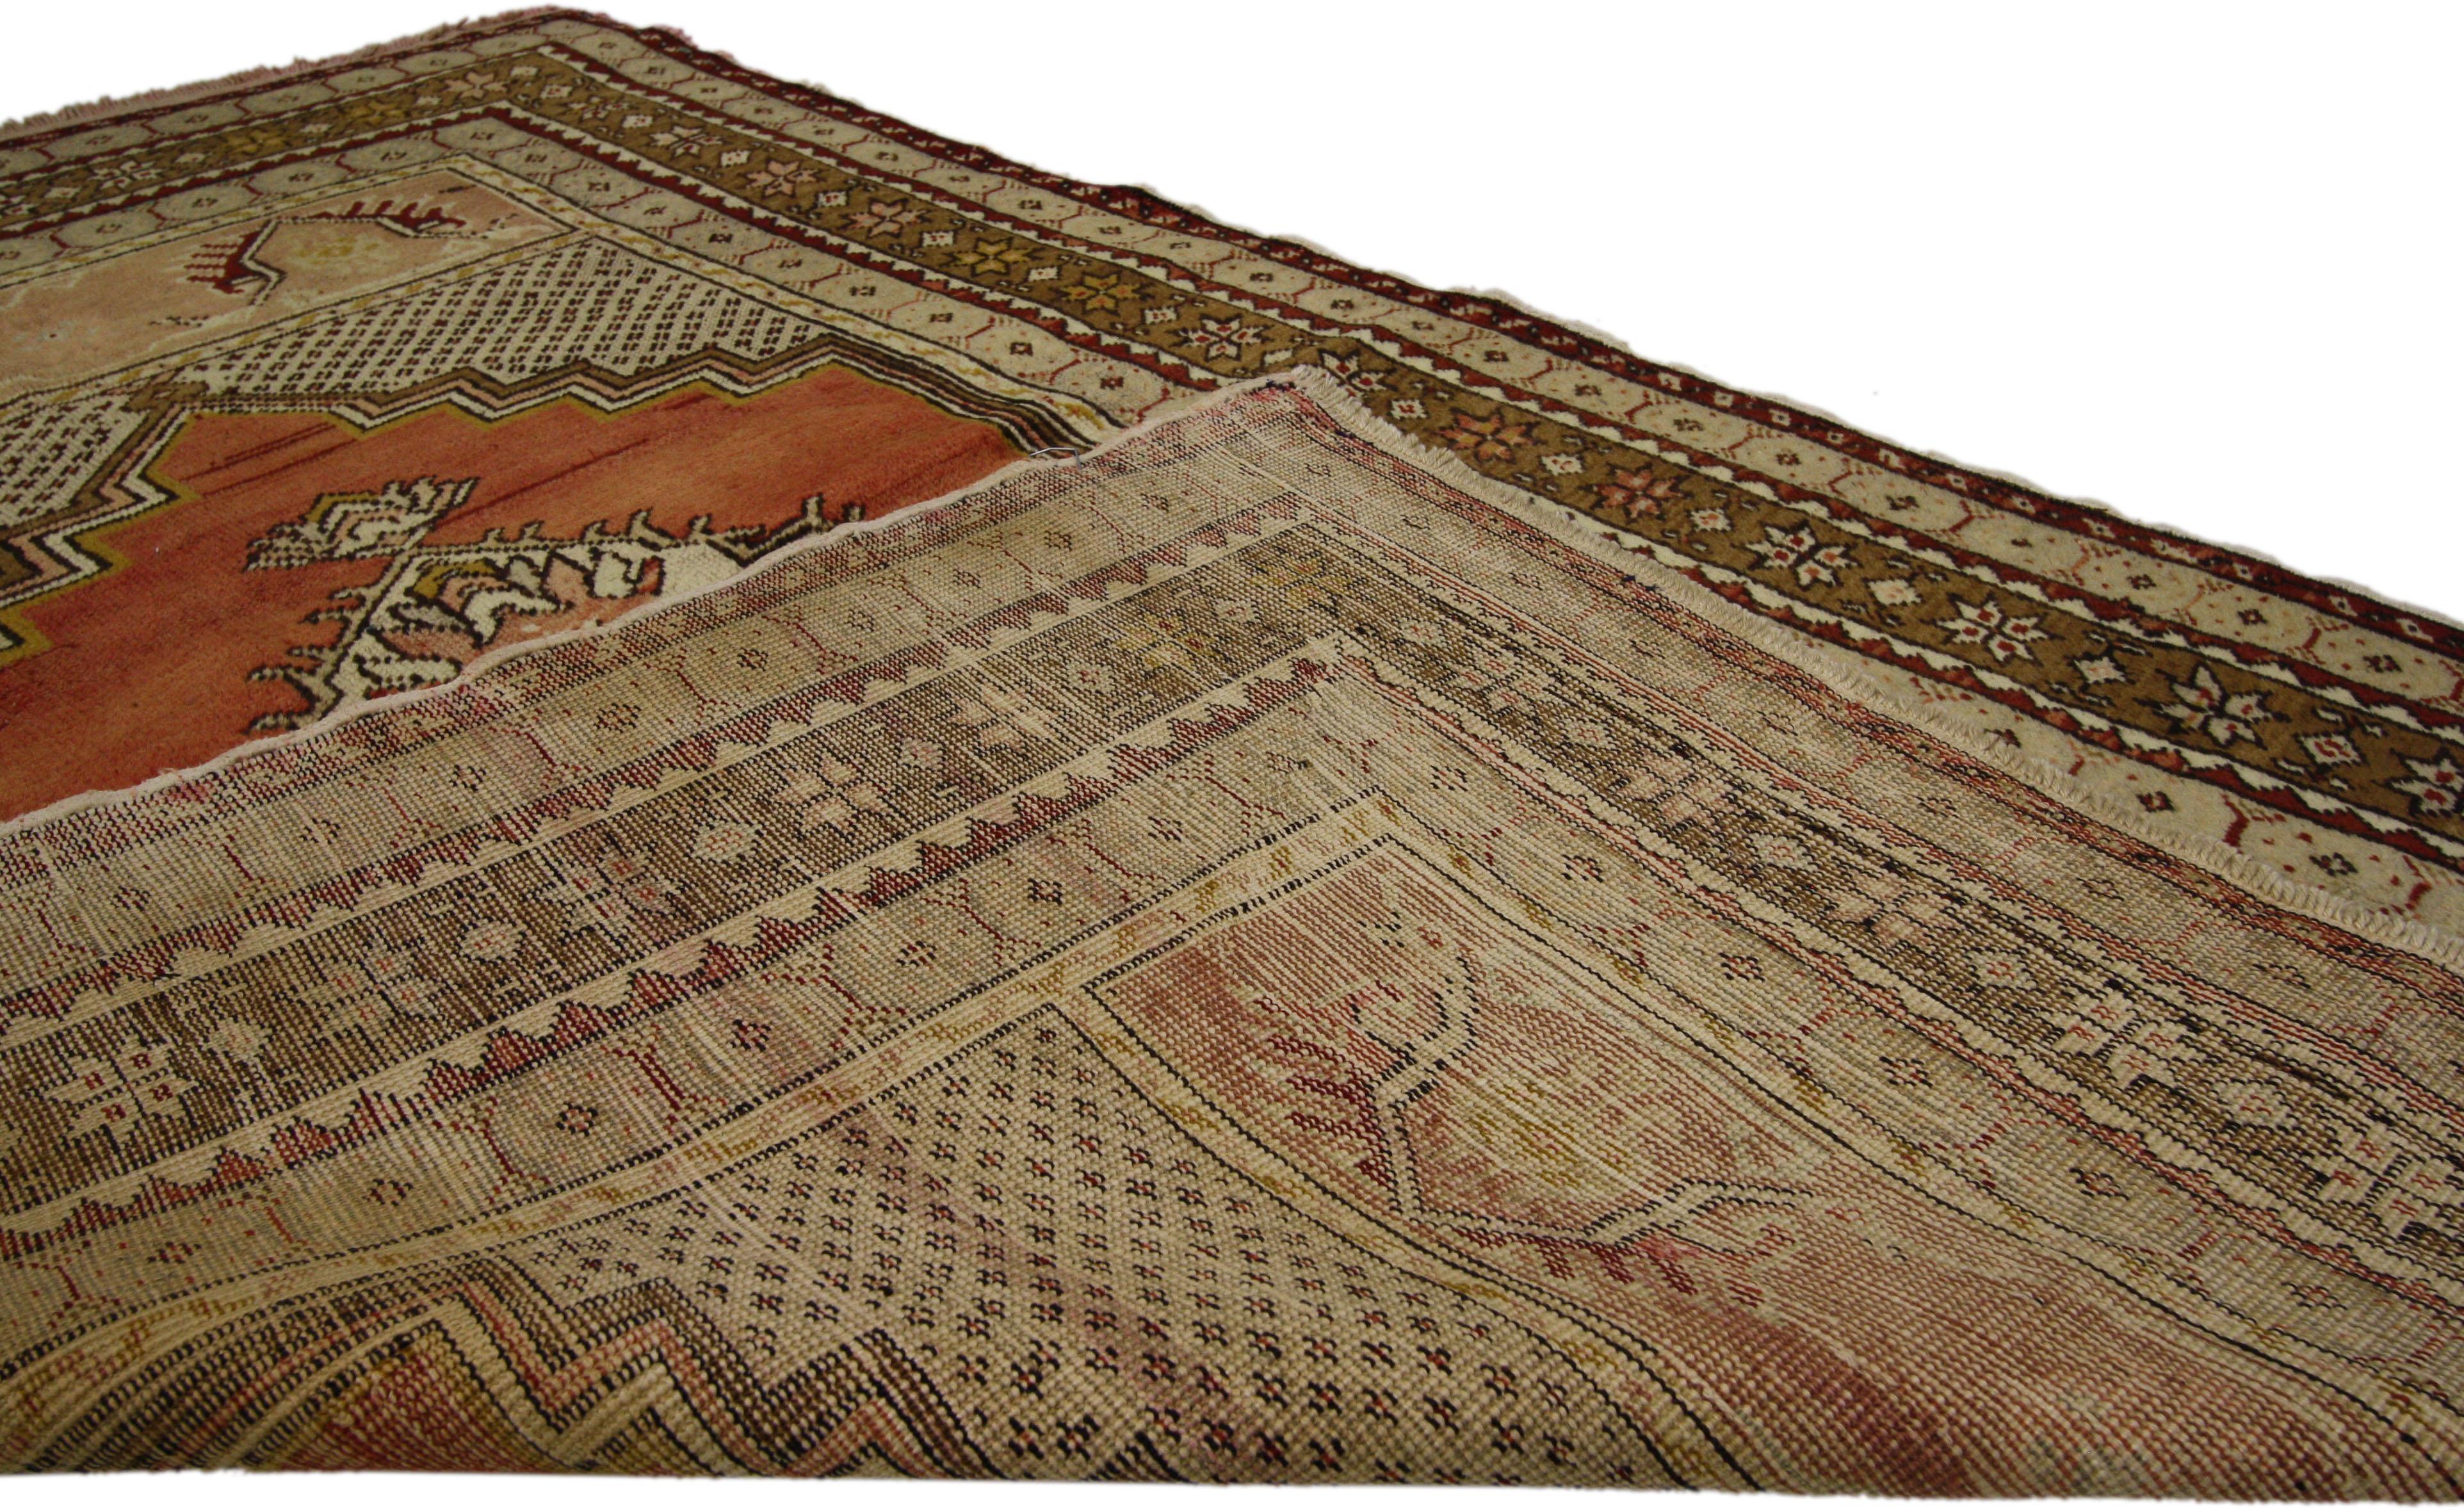 Vintage Turkish Oushak Rug, Entry or Foyer Rug In Good Condition For Sale In Dallas, TX